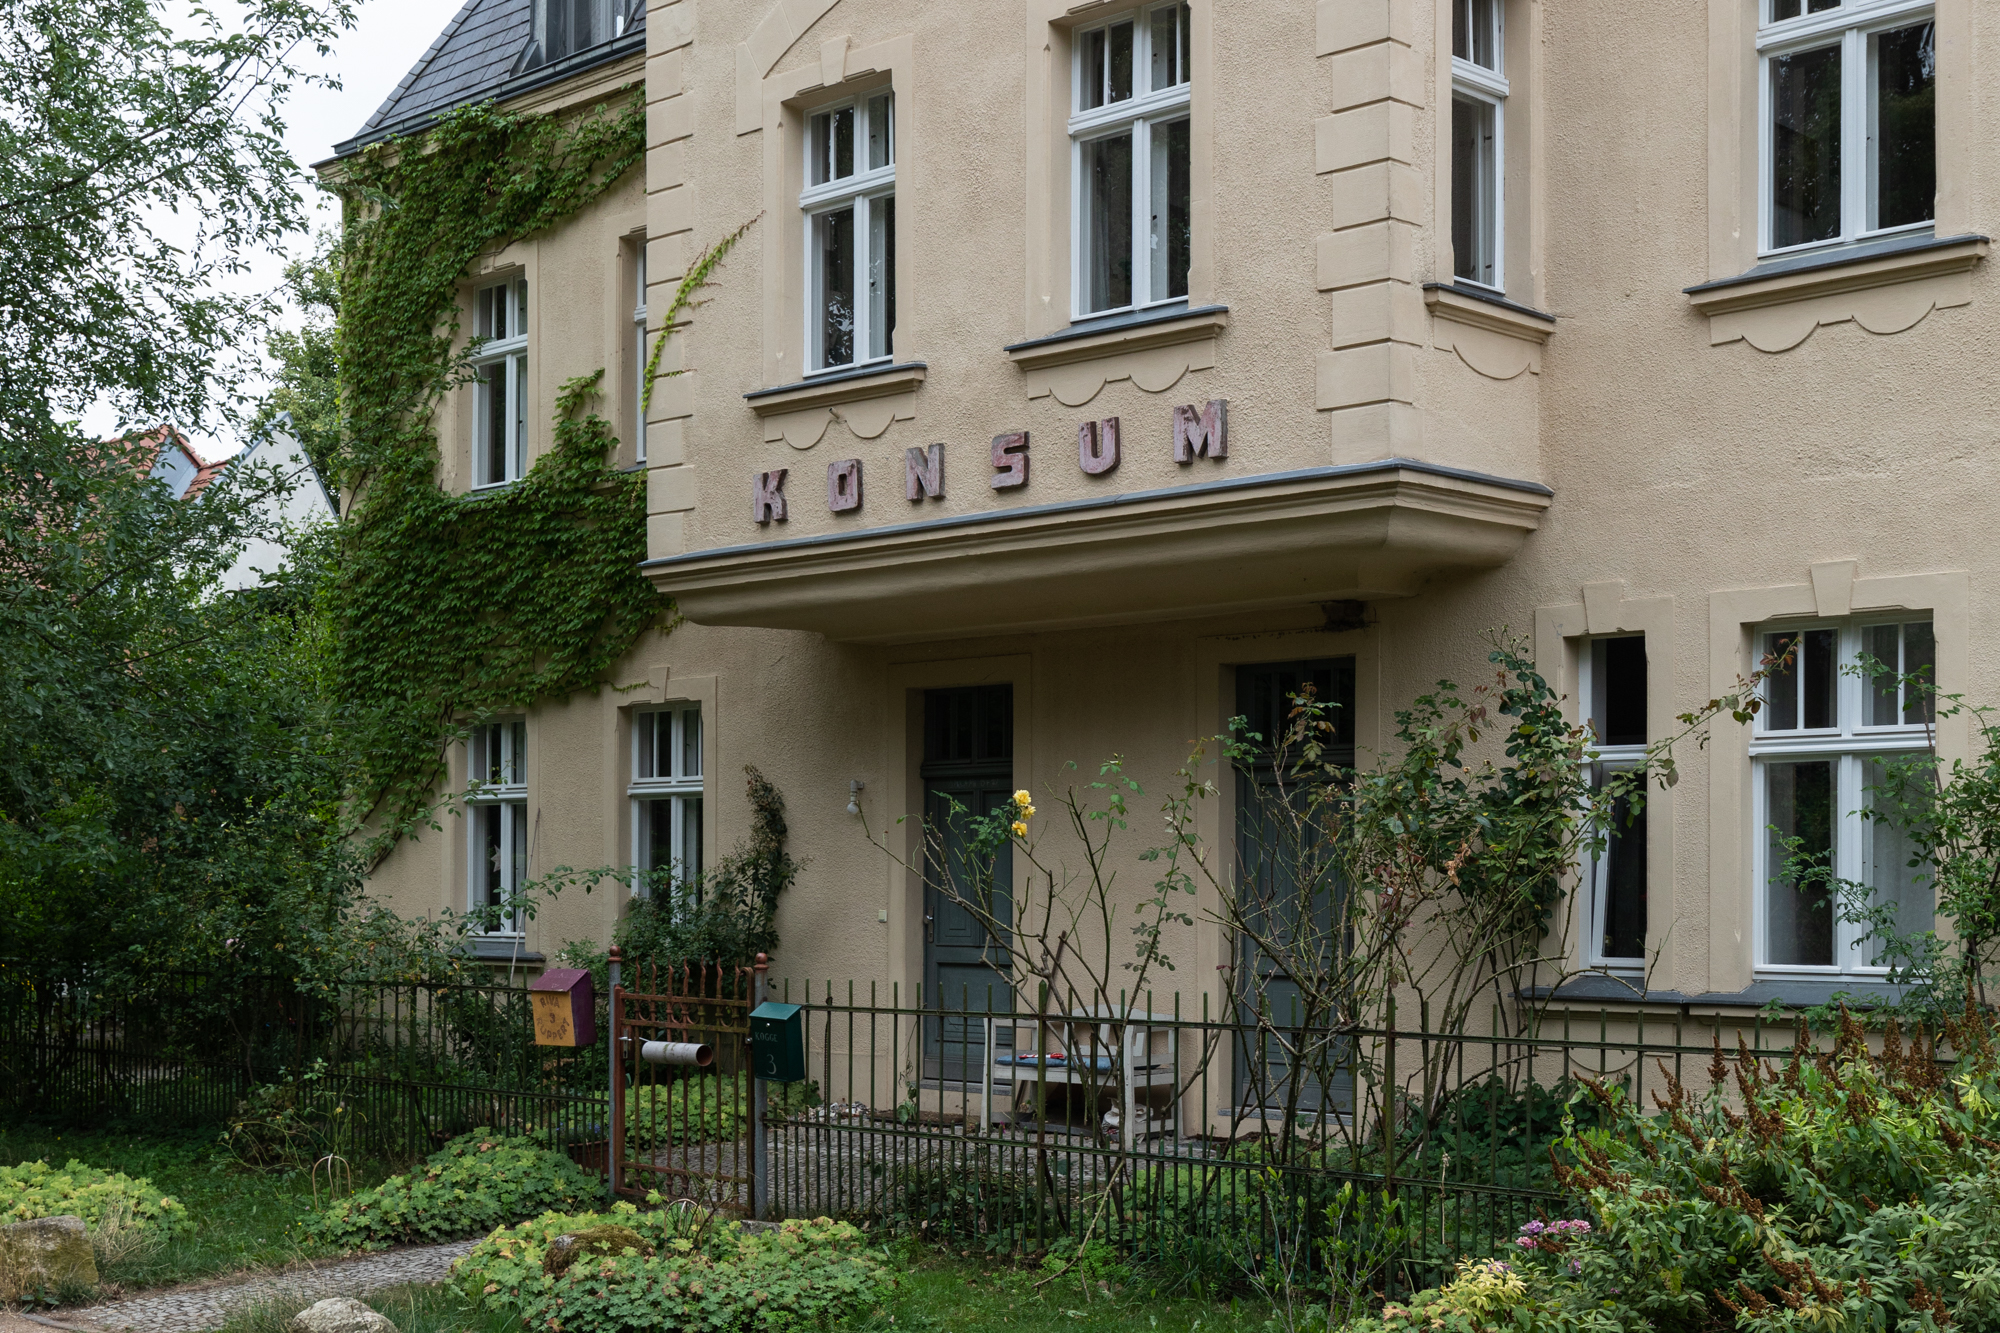 Konsum in Klein Glienicke - a former East German enclave separated from West Berlin by the Berlin Wall and only accessible with special permission